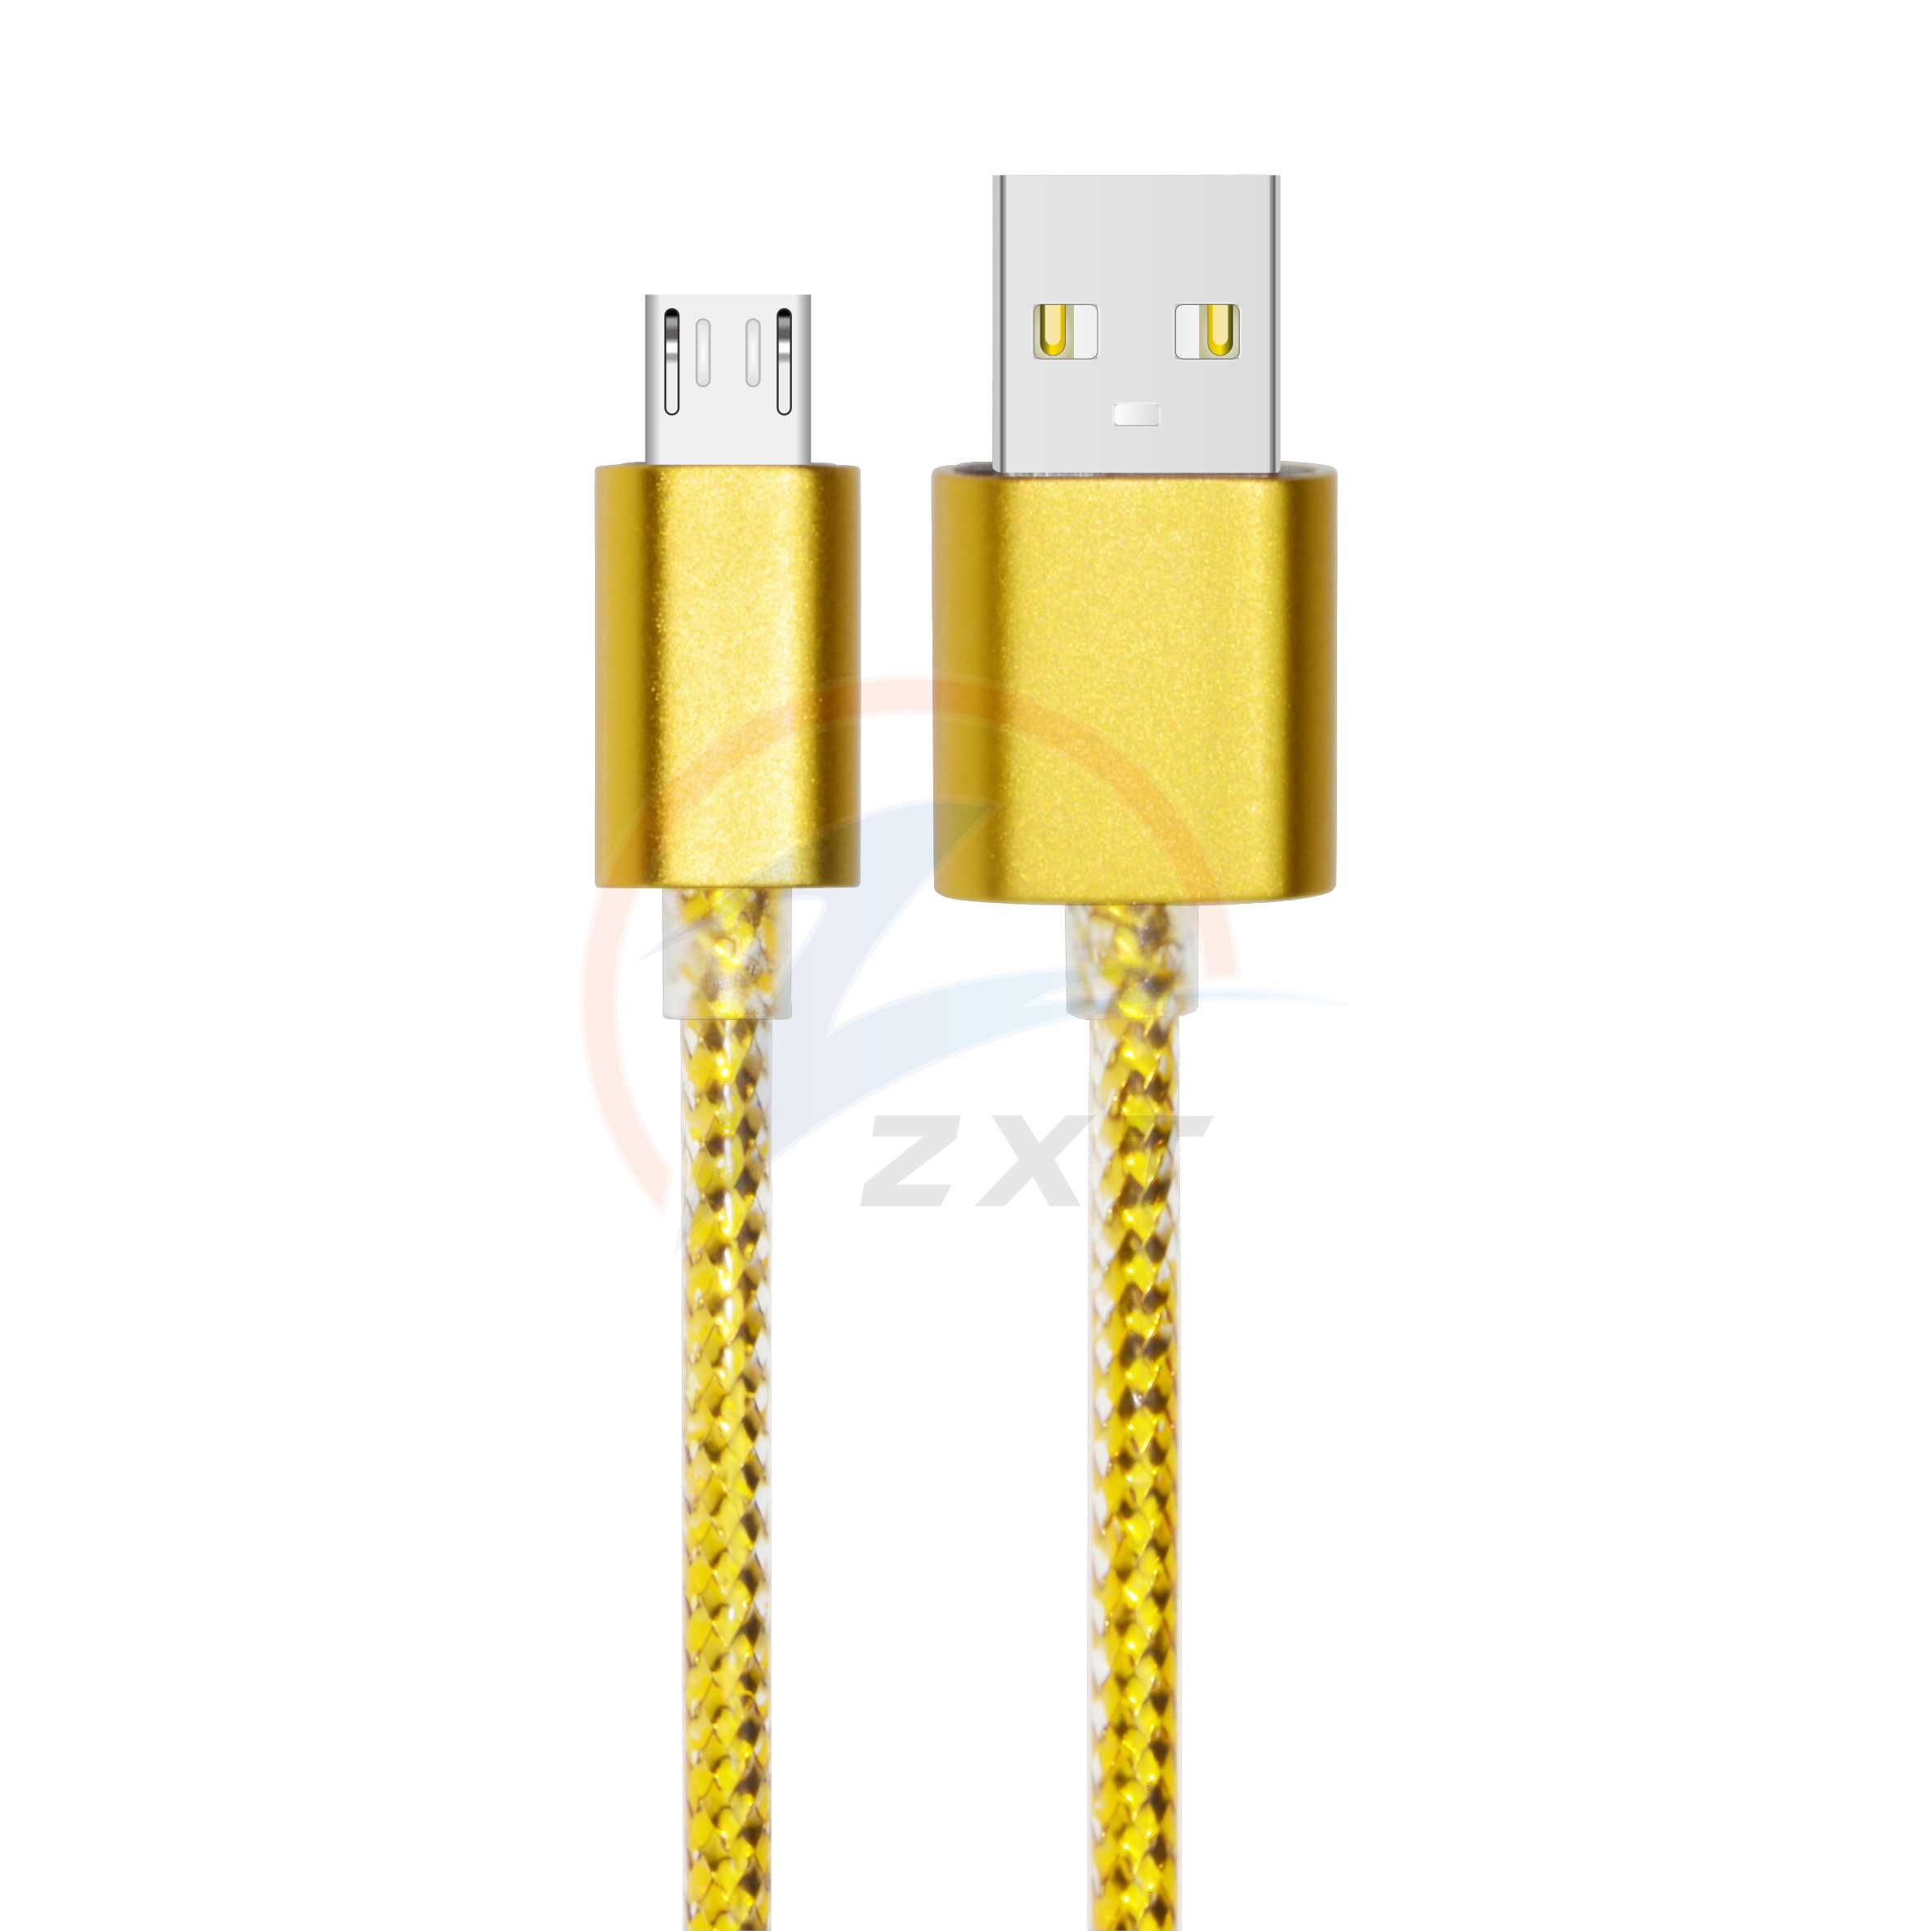 Alluminum Alloy Jelly USB Cable